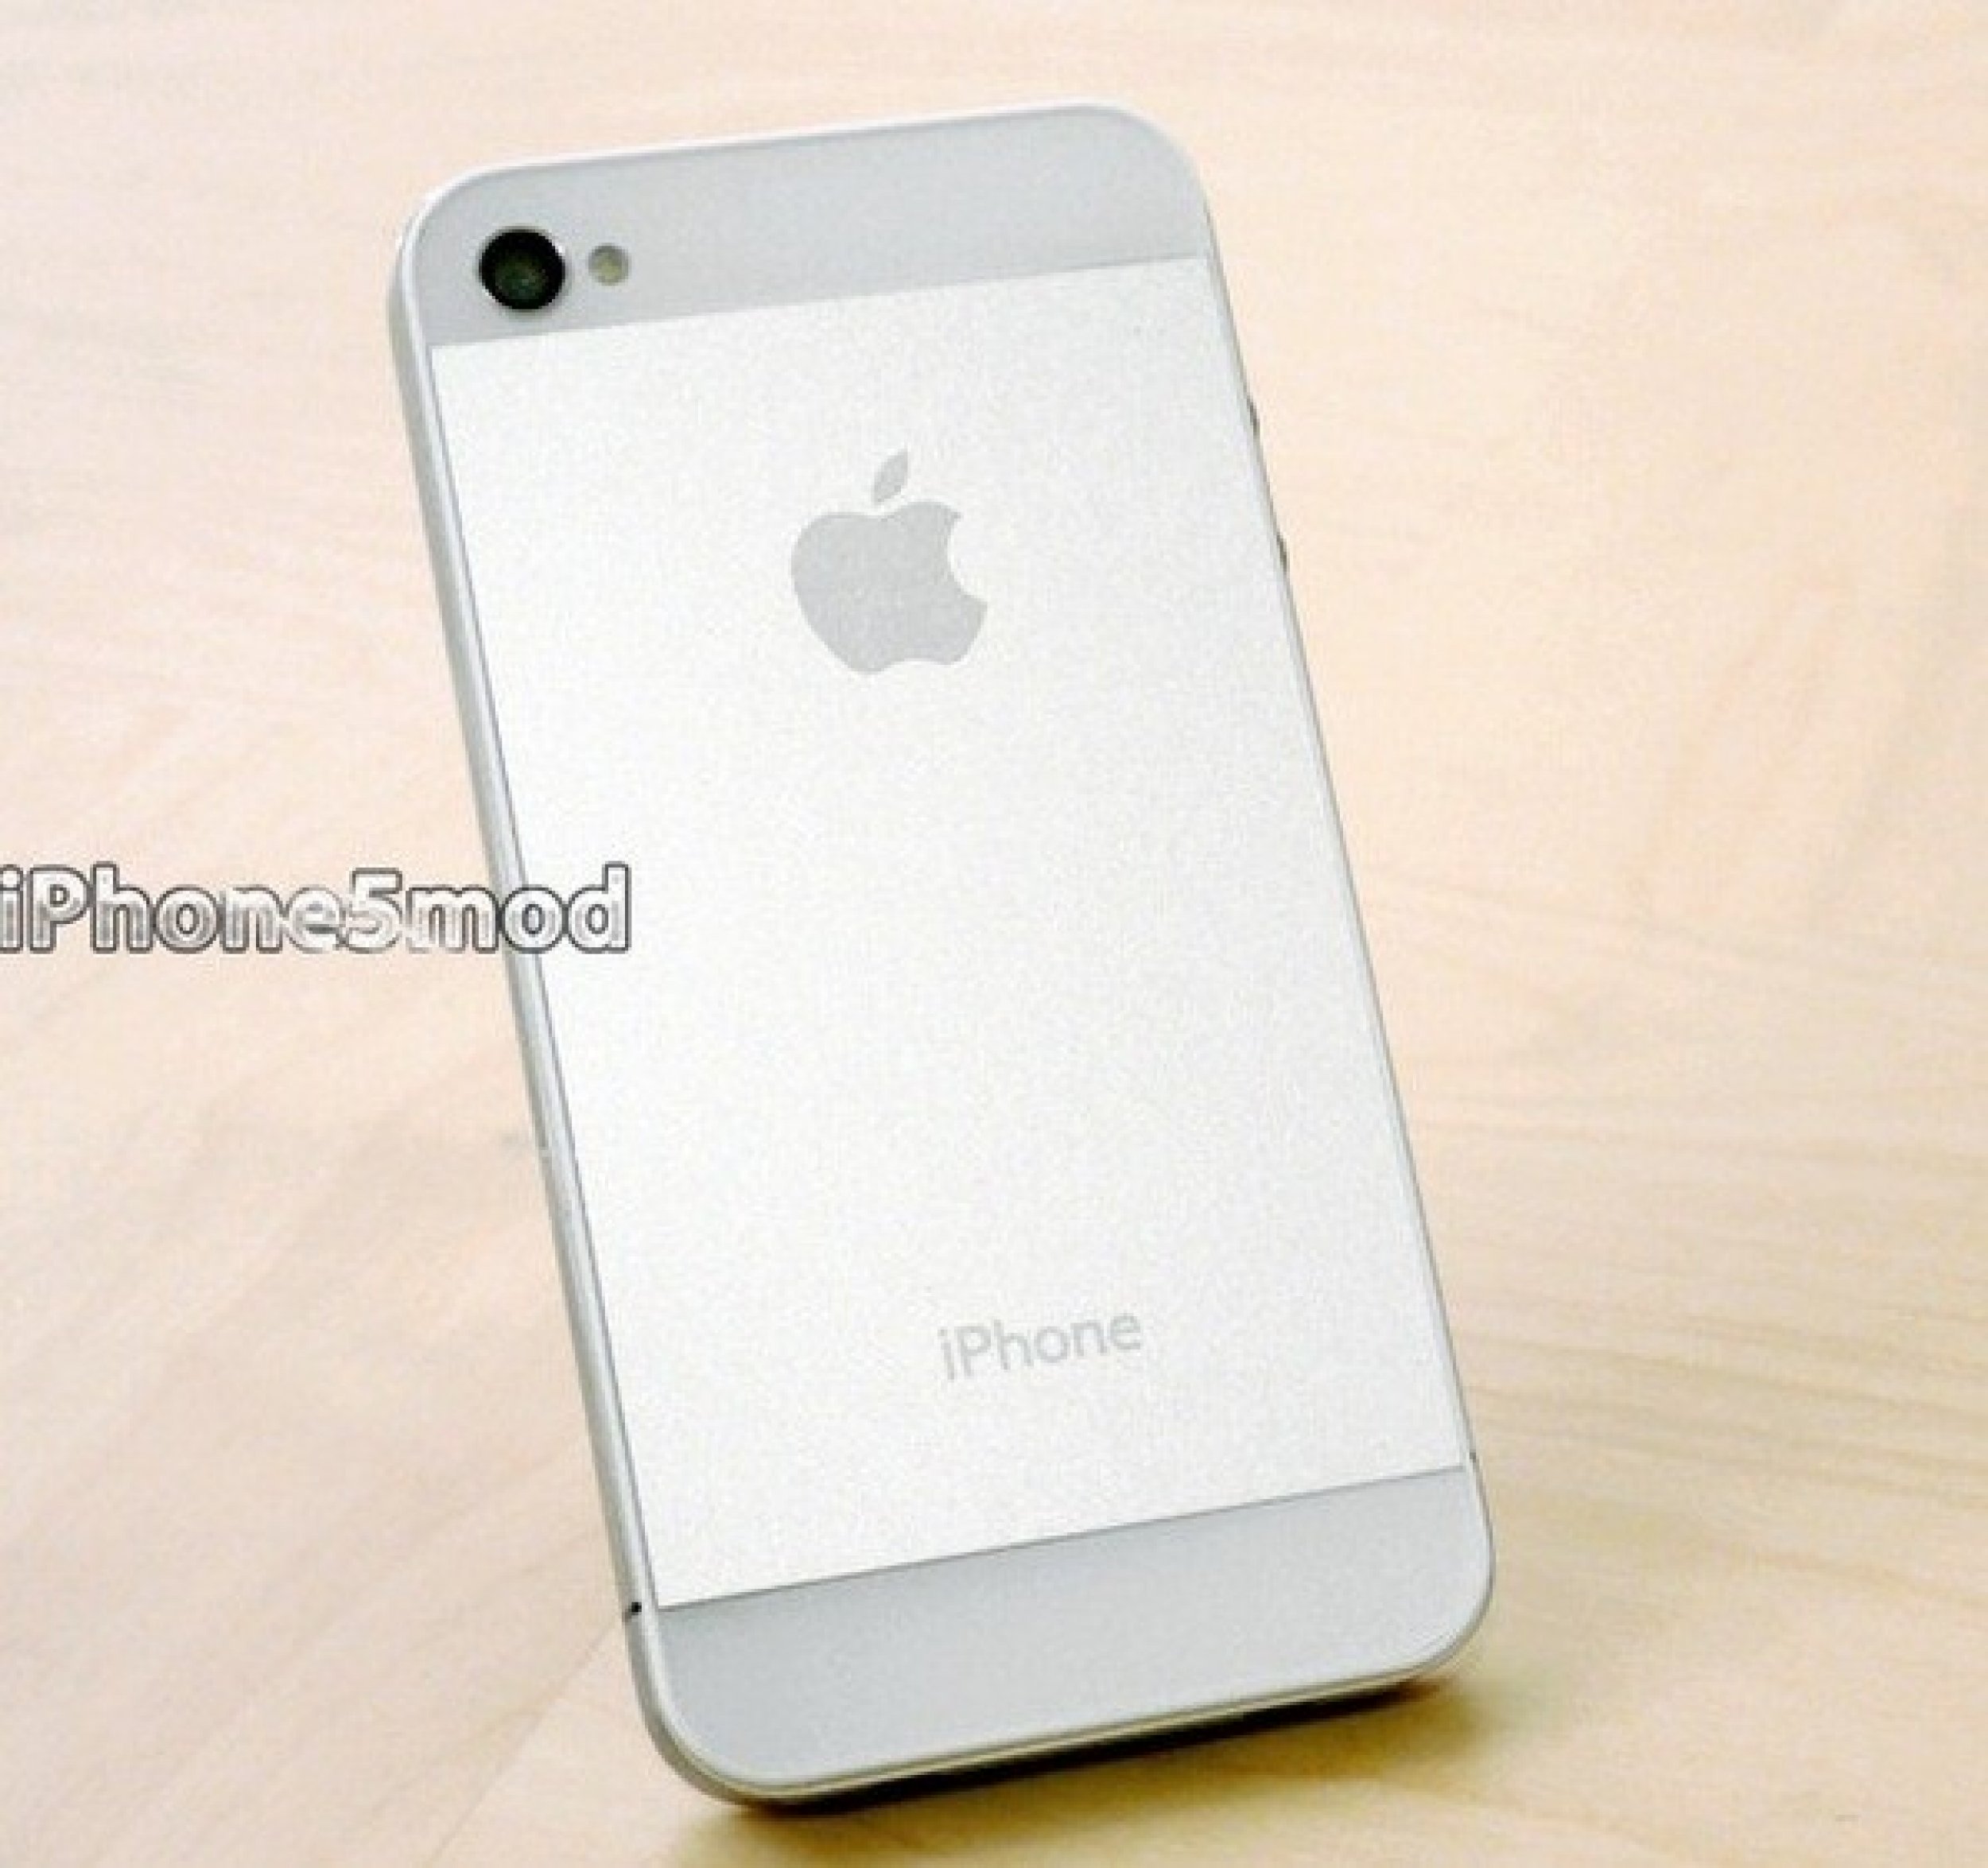 Apple iPhone 5 How To Modify Your iPhone 44S With Next-Gen Specs, Features PICTURES, VIDEO